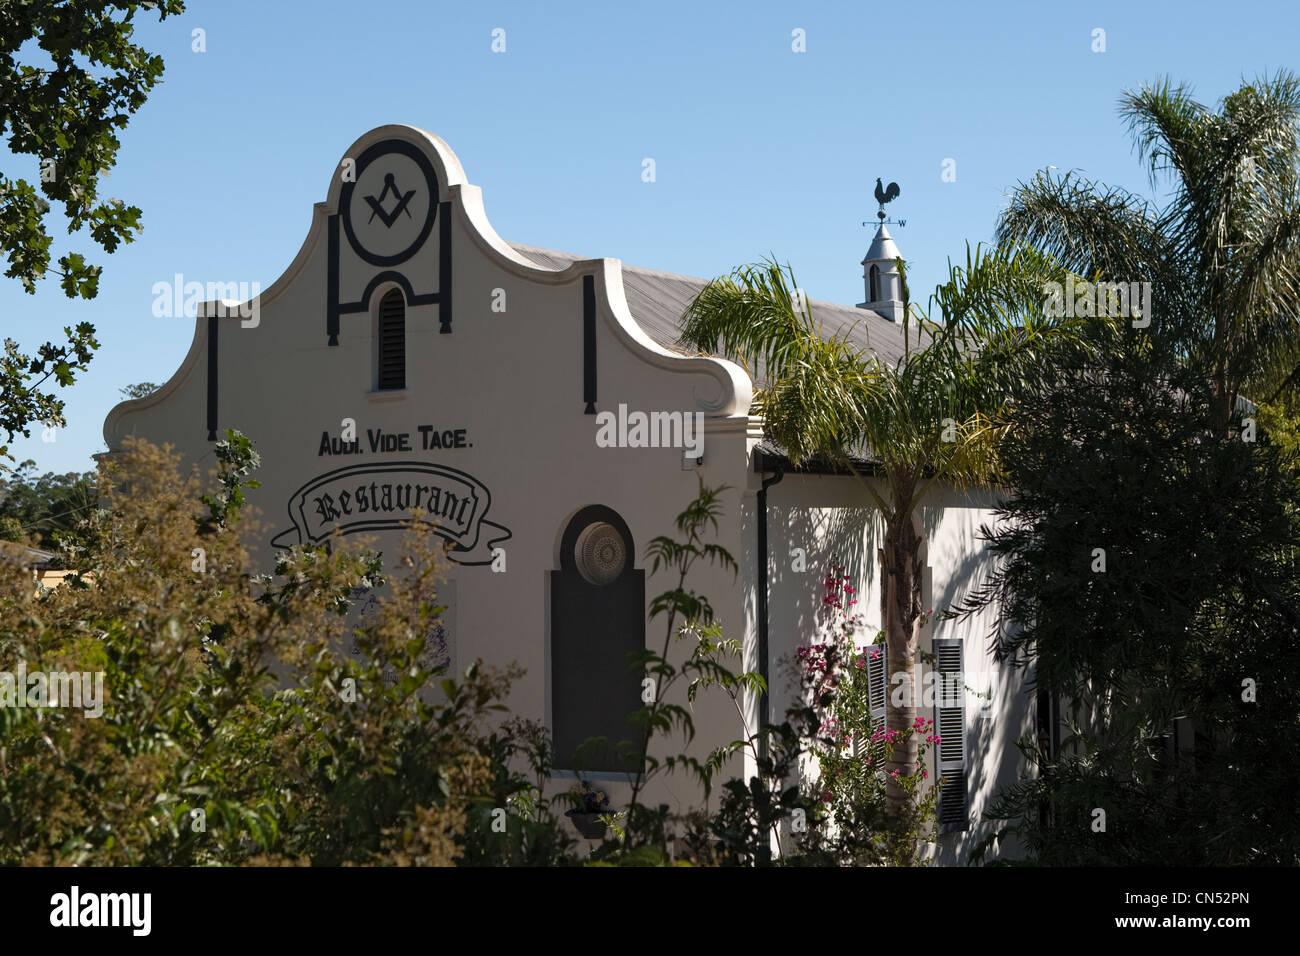 Old masonic hall, 'Audi, Vide, Tace', Swellendam, Garden Route South Africa Stock Photo